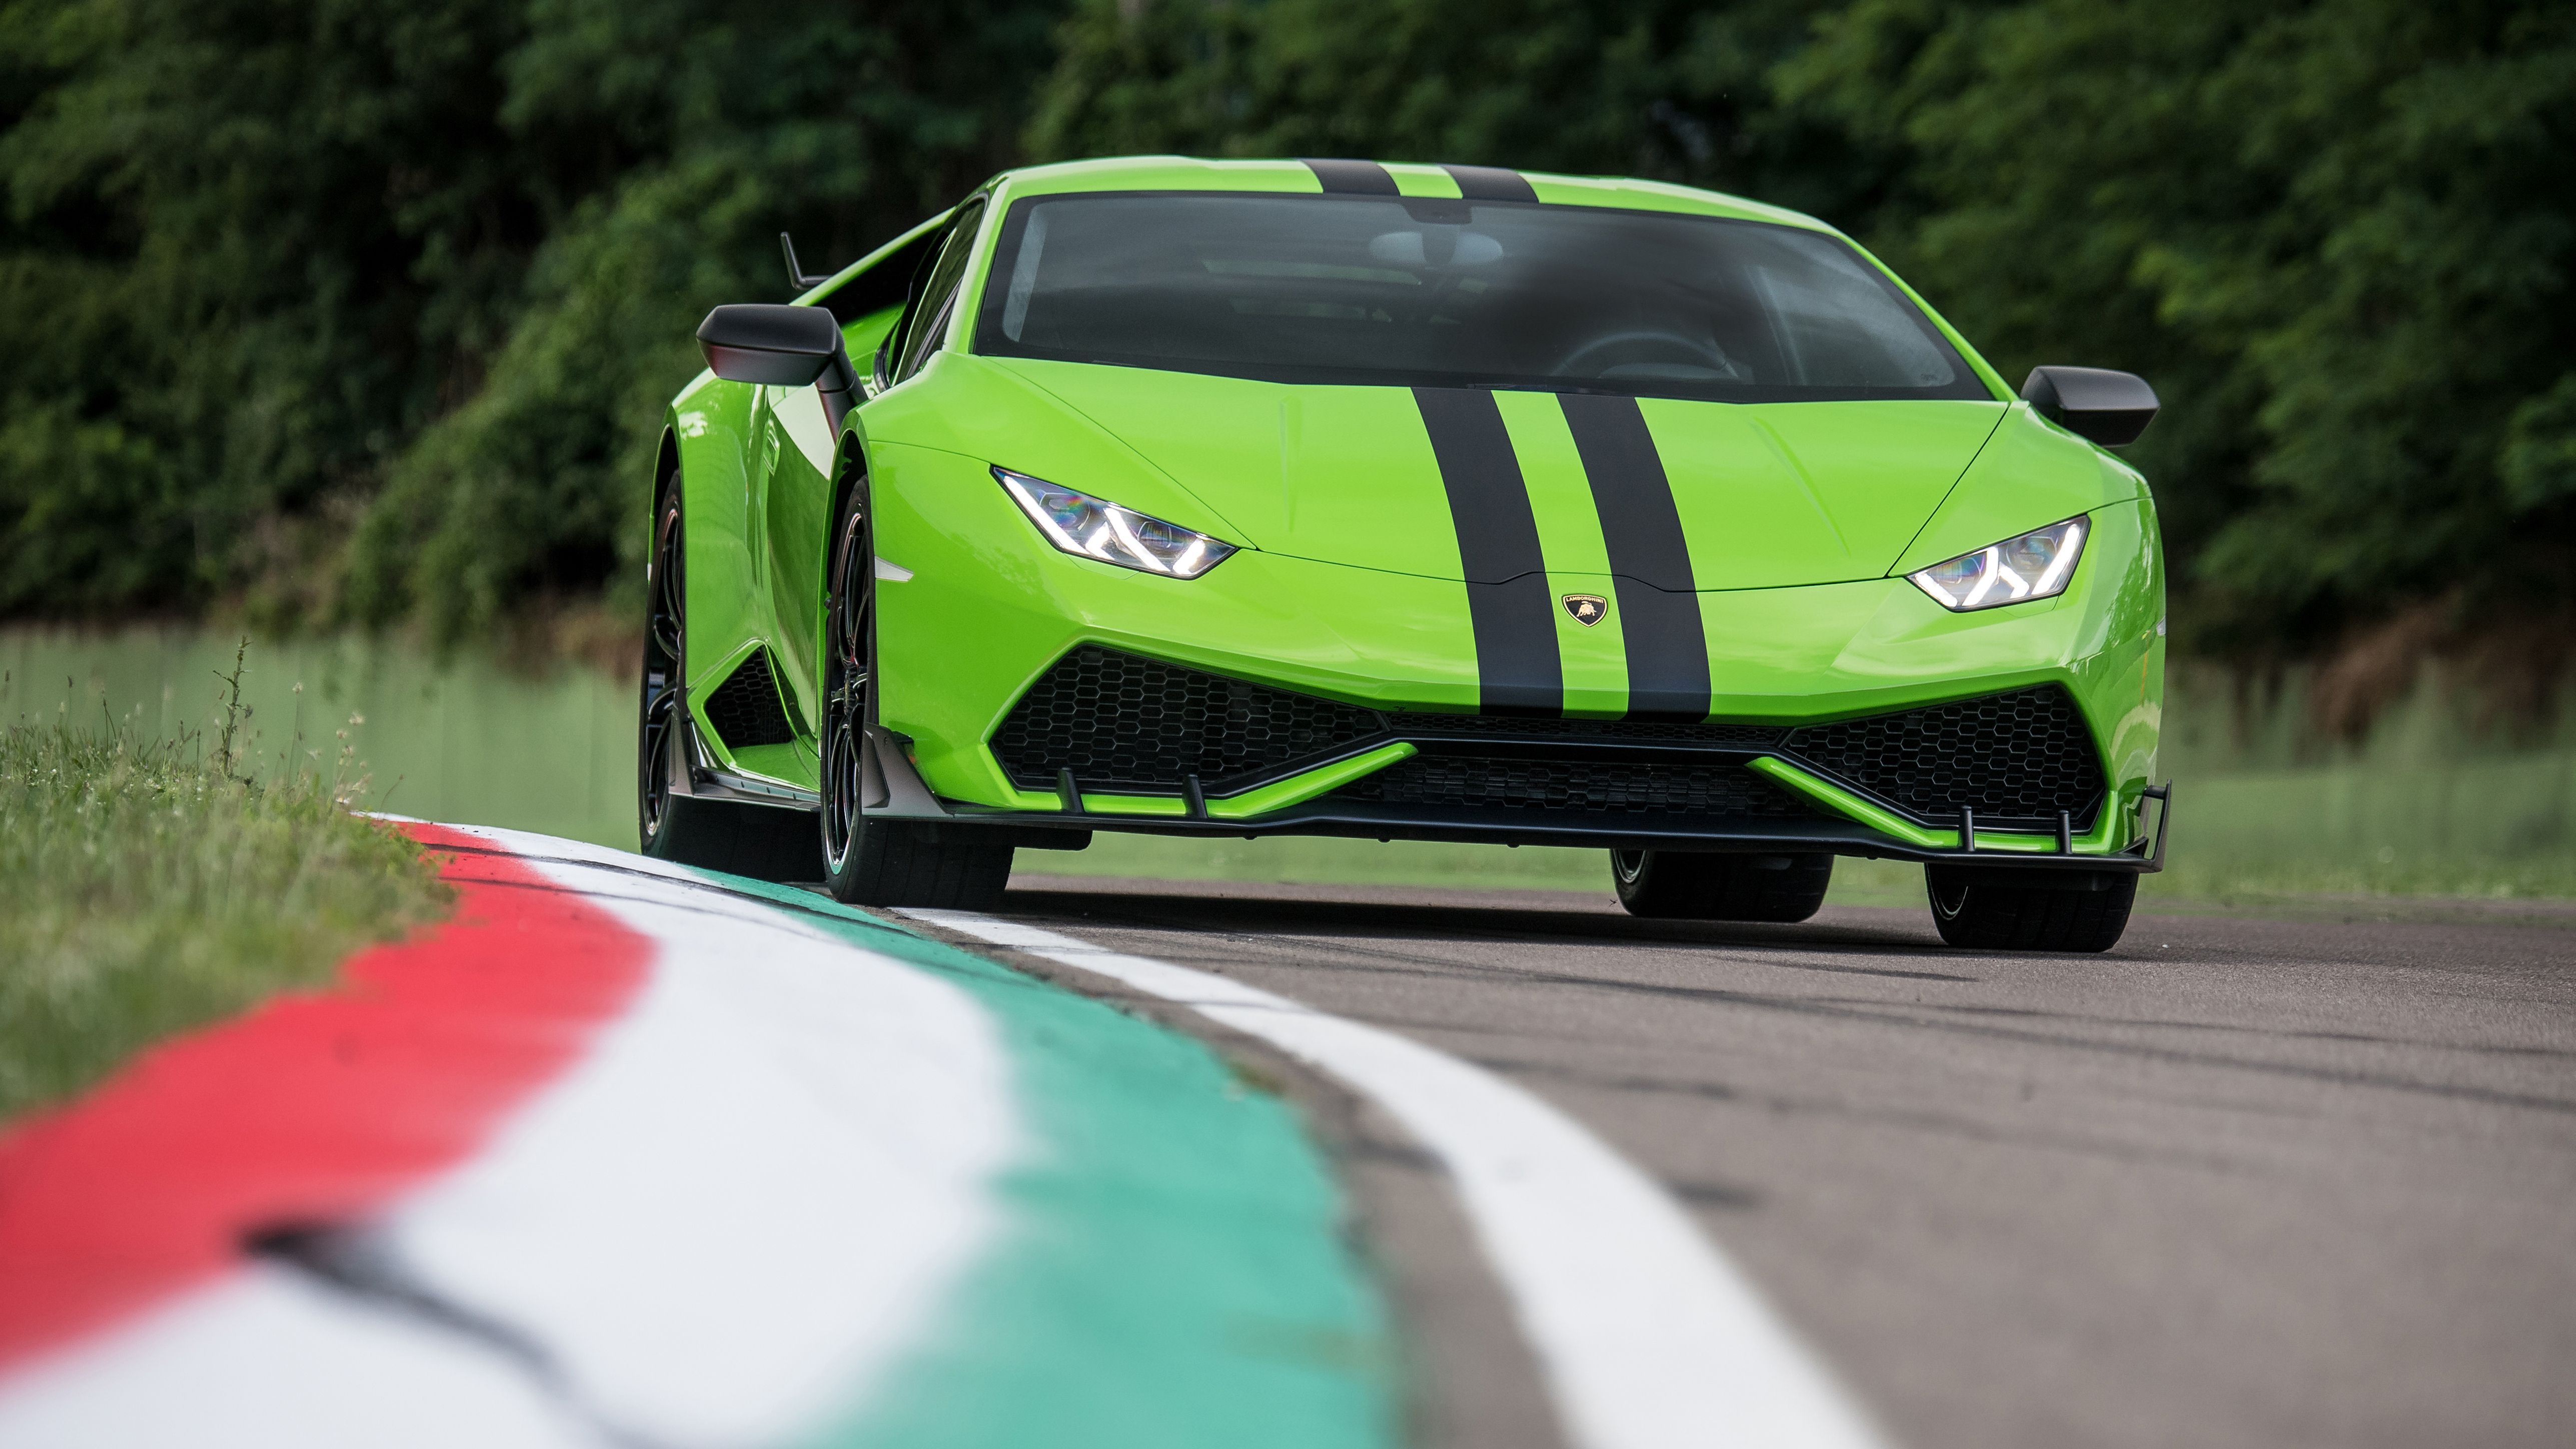 2018 Lamborghini Huracan with After Sales Packages